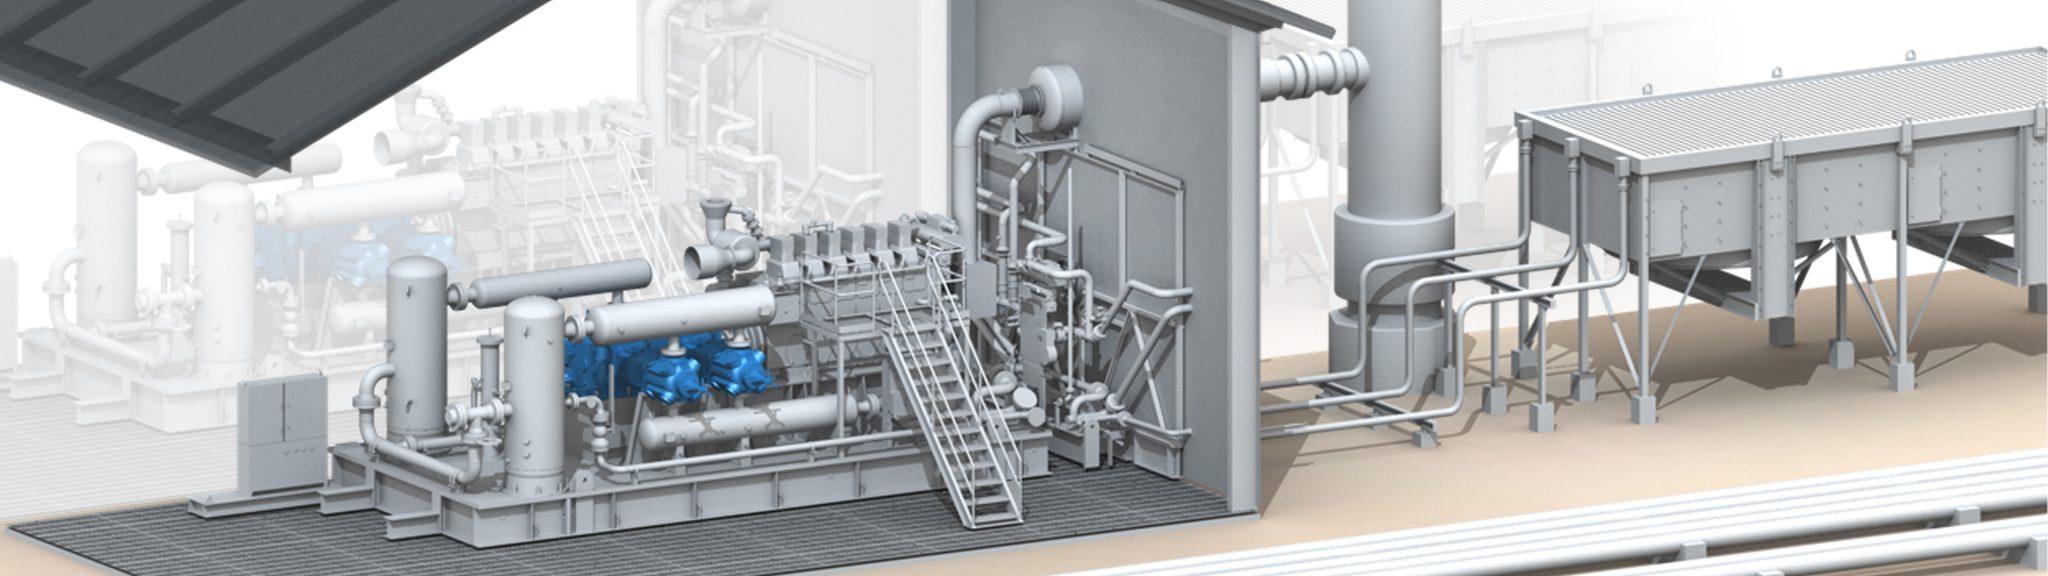 A rendering of a compressor station sending natural gas to a pipeline after being withdrawn